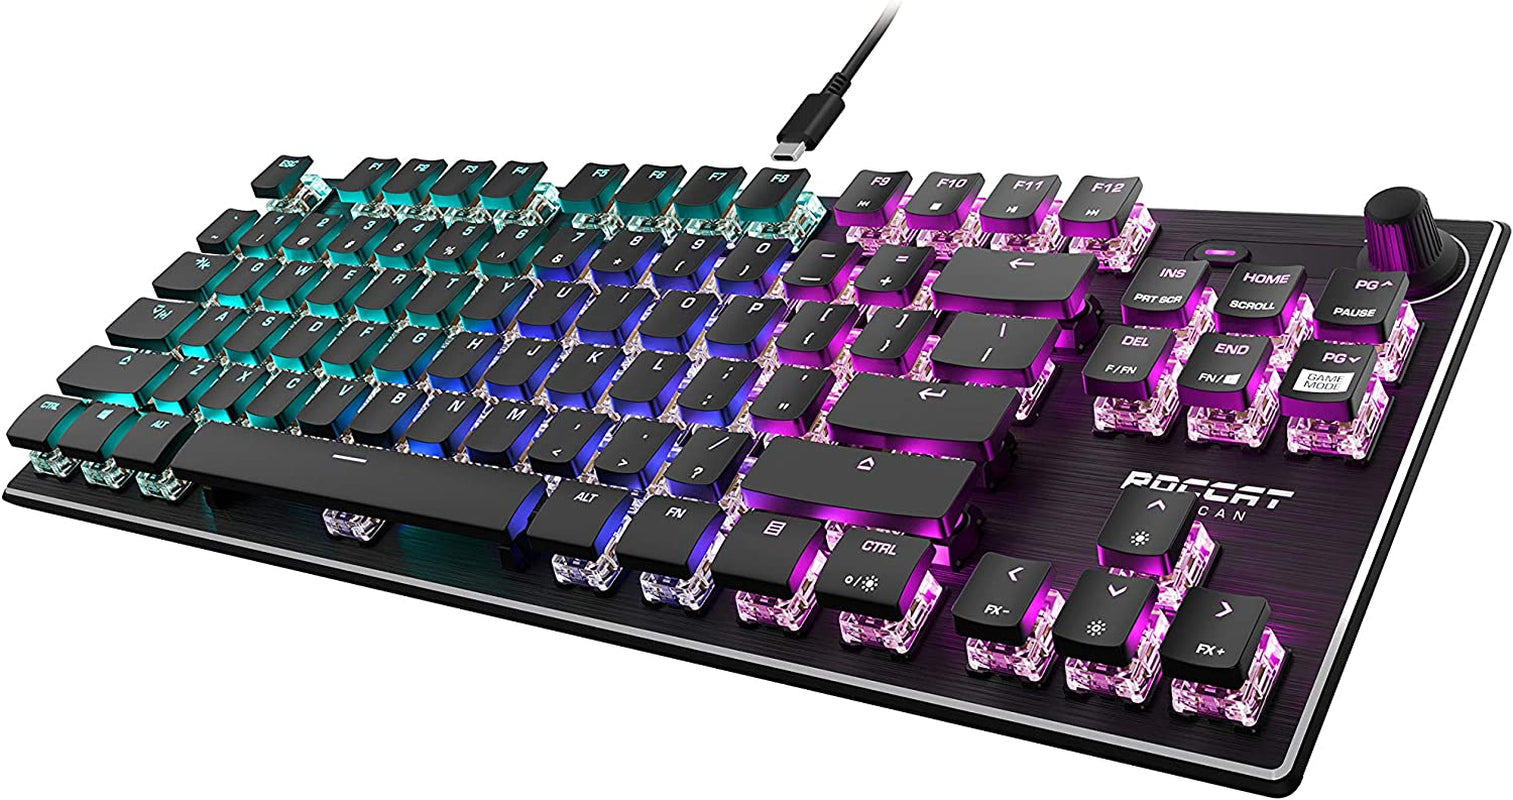 Vulcan TKL Mechanical PC Tactile Gaming Keyboard, Compact, Tenkeyless, Titan Switch Optical, RGB AIMO Lighting, Anodized Aluminum Top Plate, Detachable USB-C Cable, Low Profile Design, Black